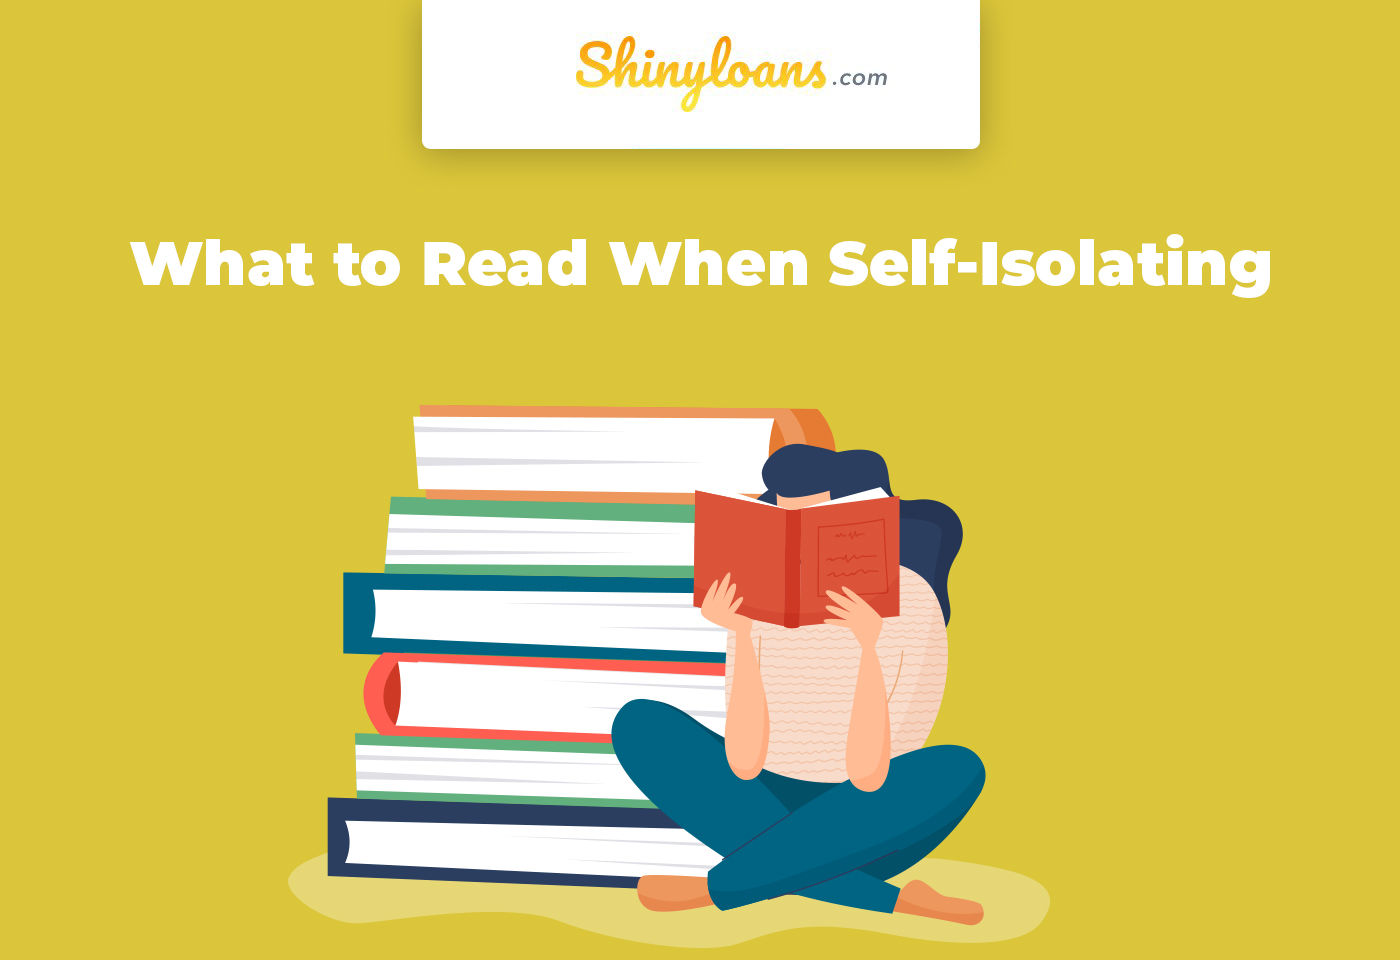 What to Read When Self-Isolating